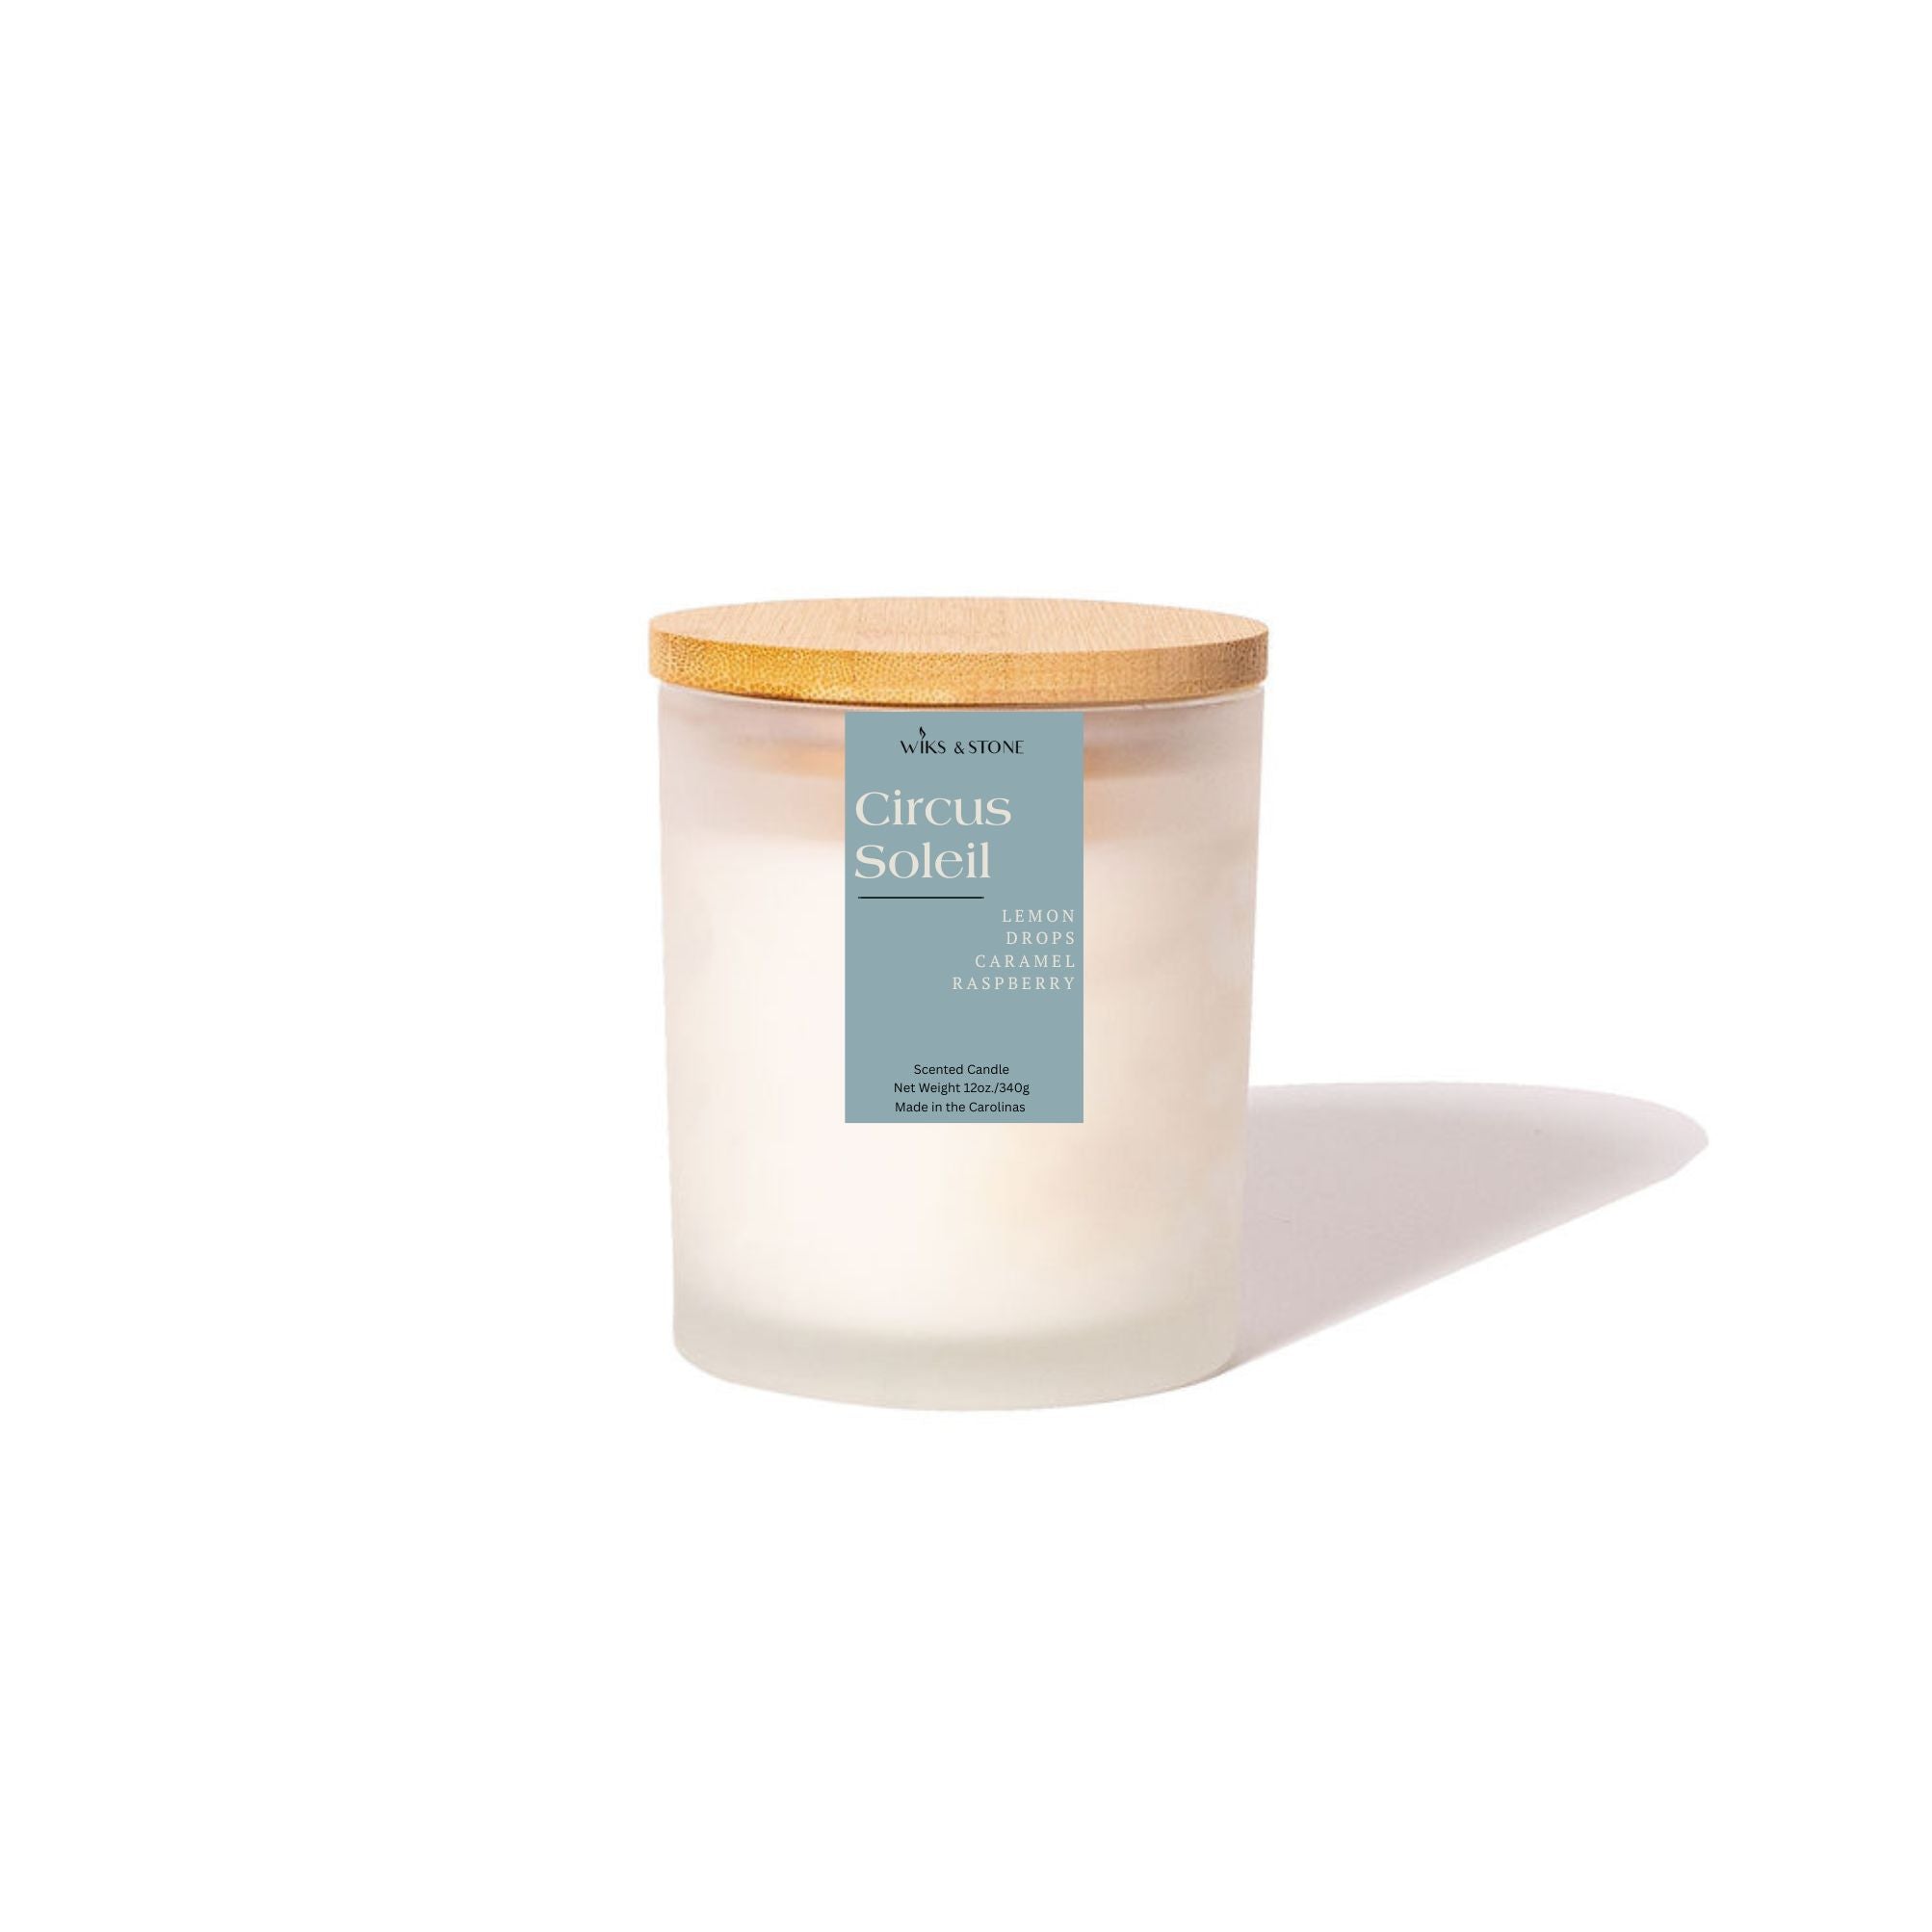 Circus Soleil Candle